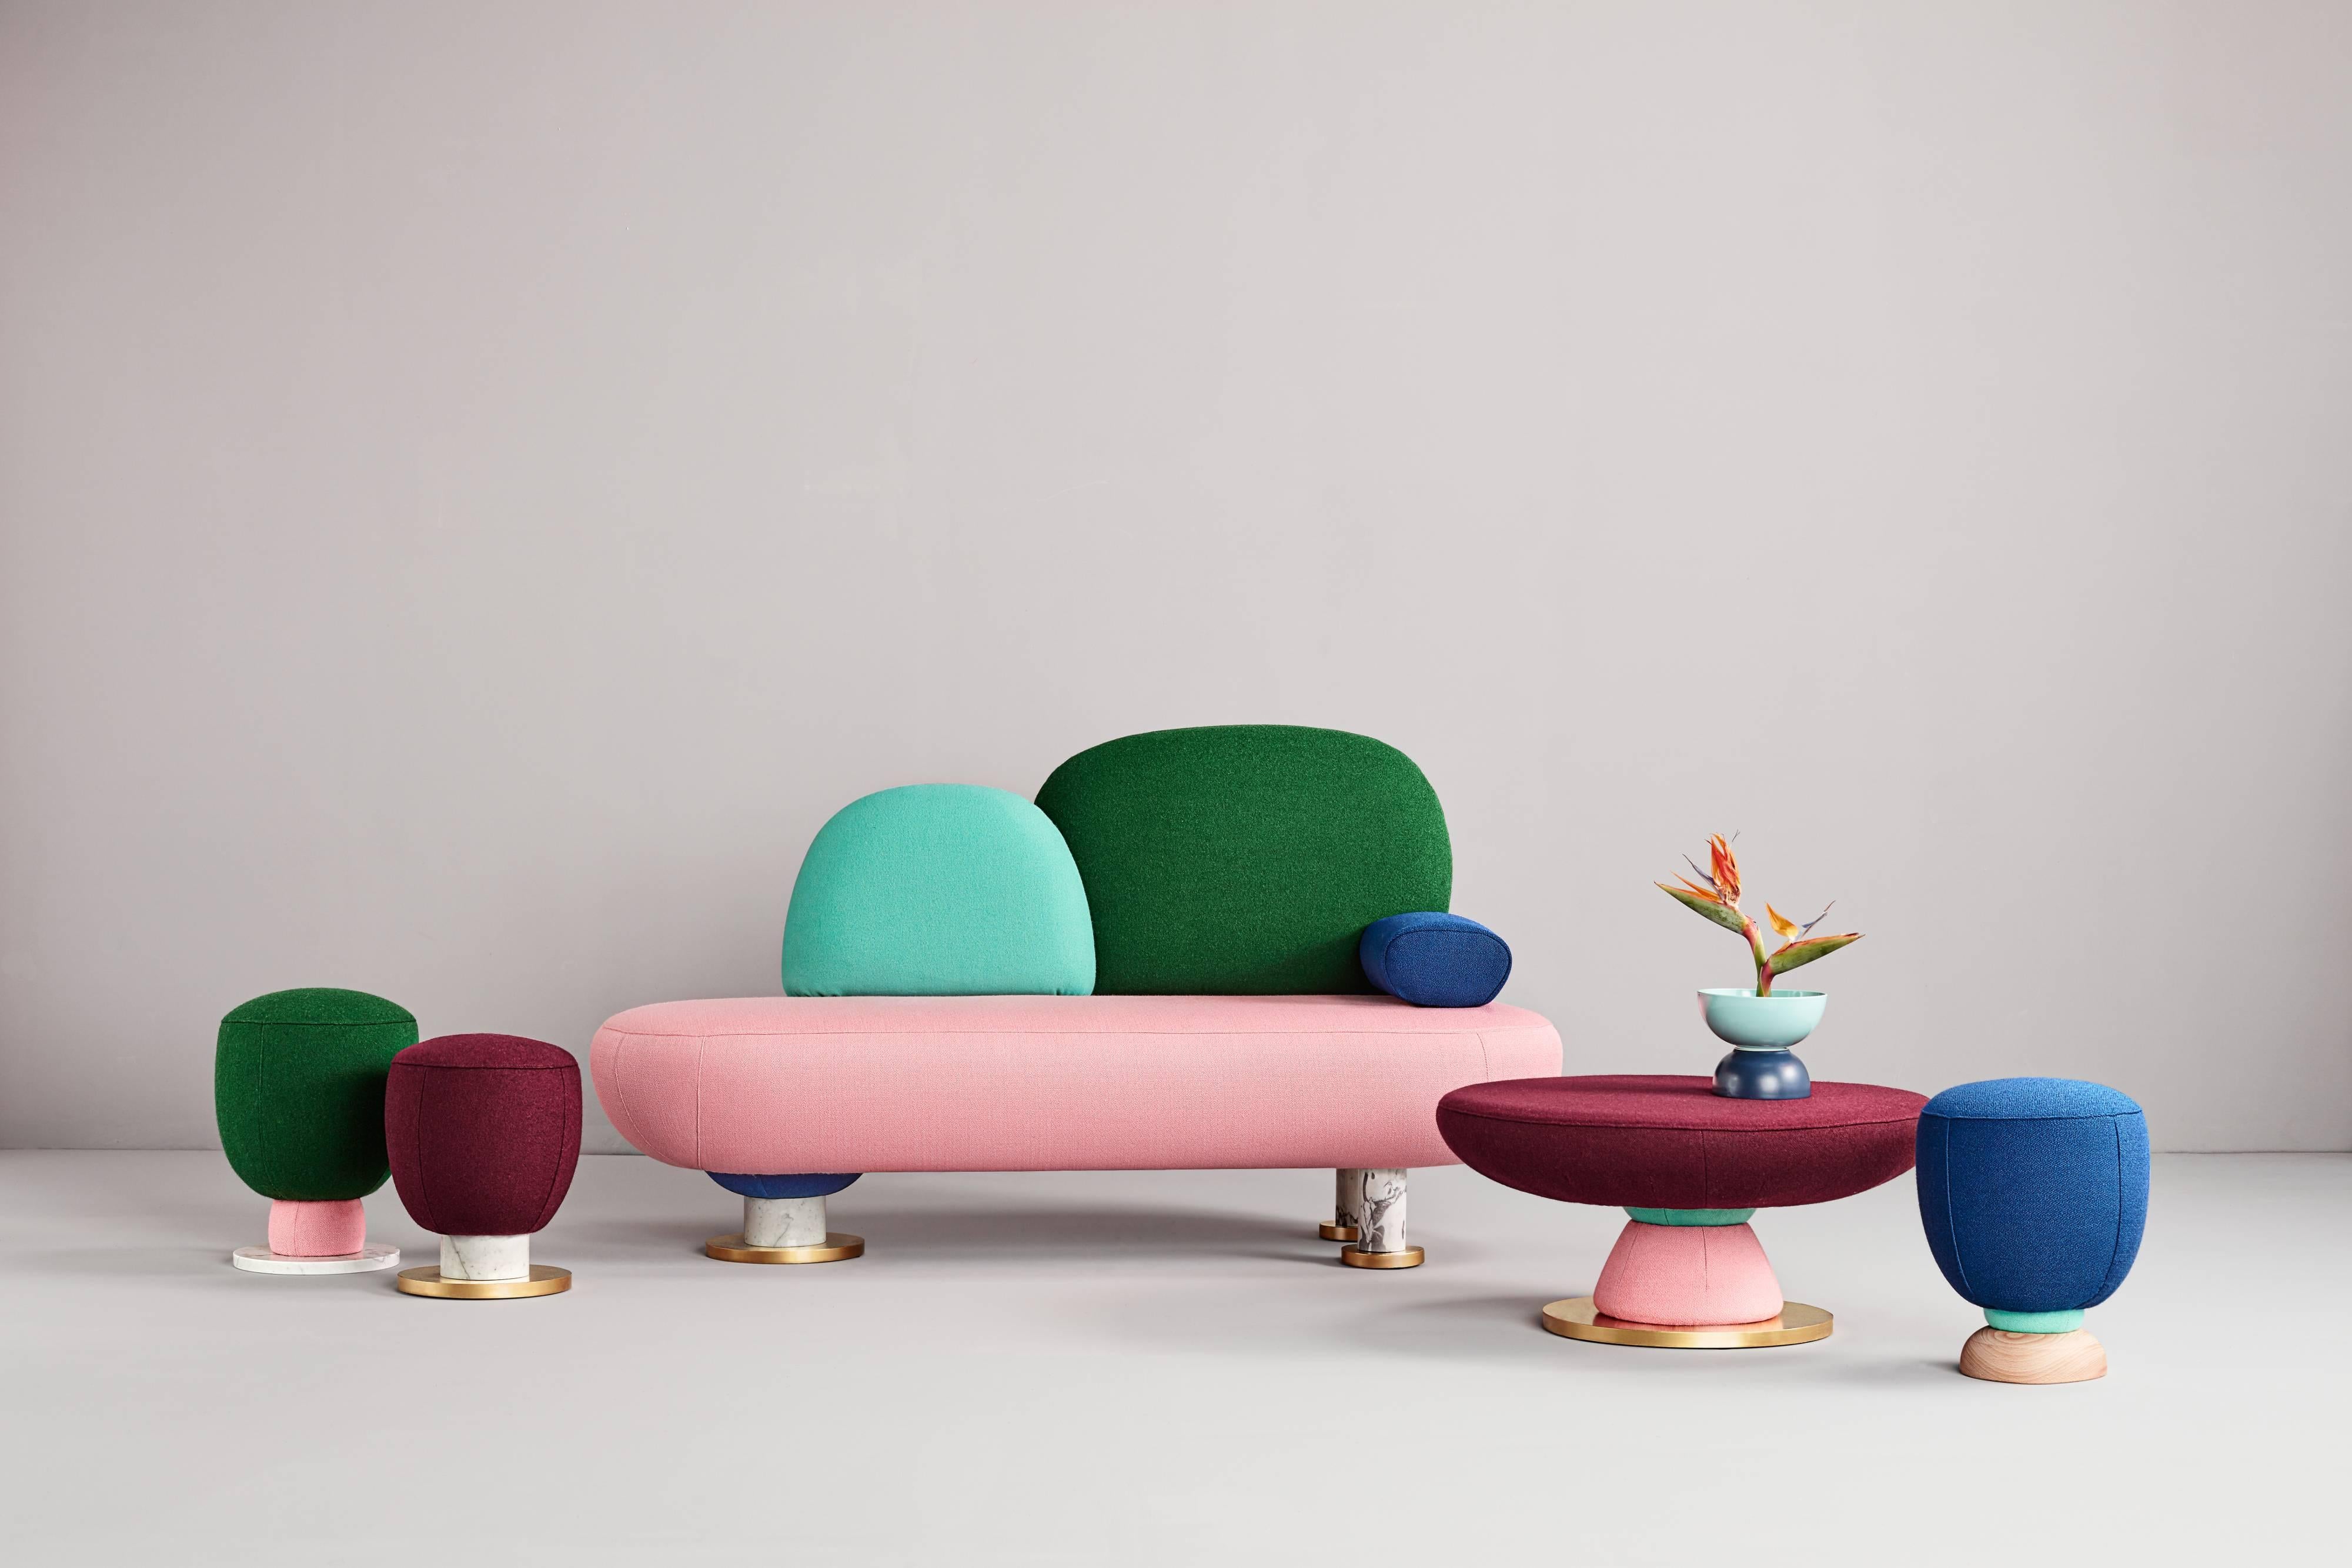 Toadstool collection ensemble sofa, table and puffs, Masquespacio.

Made to order fabrics and colors can be chosen.

This collection of puffs, table and sofa bench designed by Masquespacio is inspired in the visual culture and graphic design